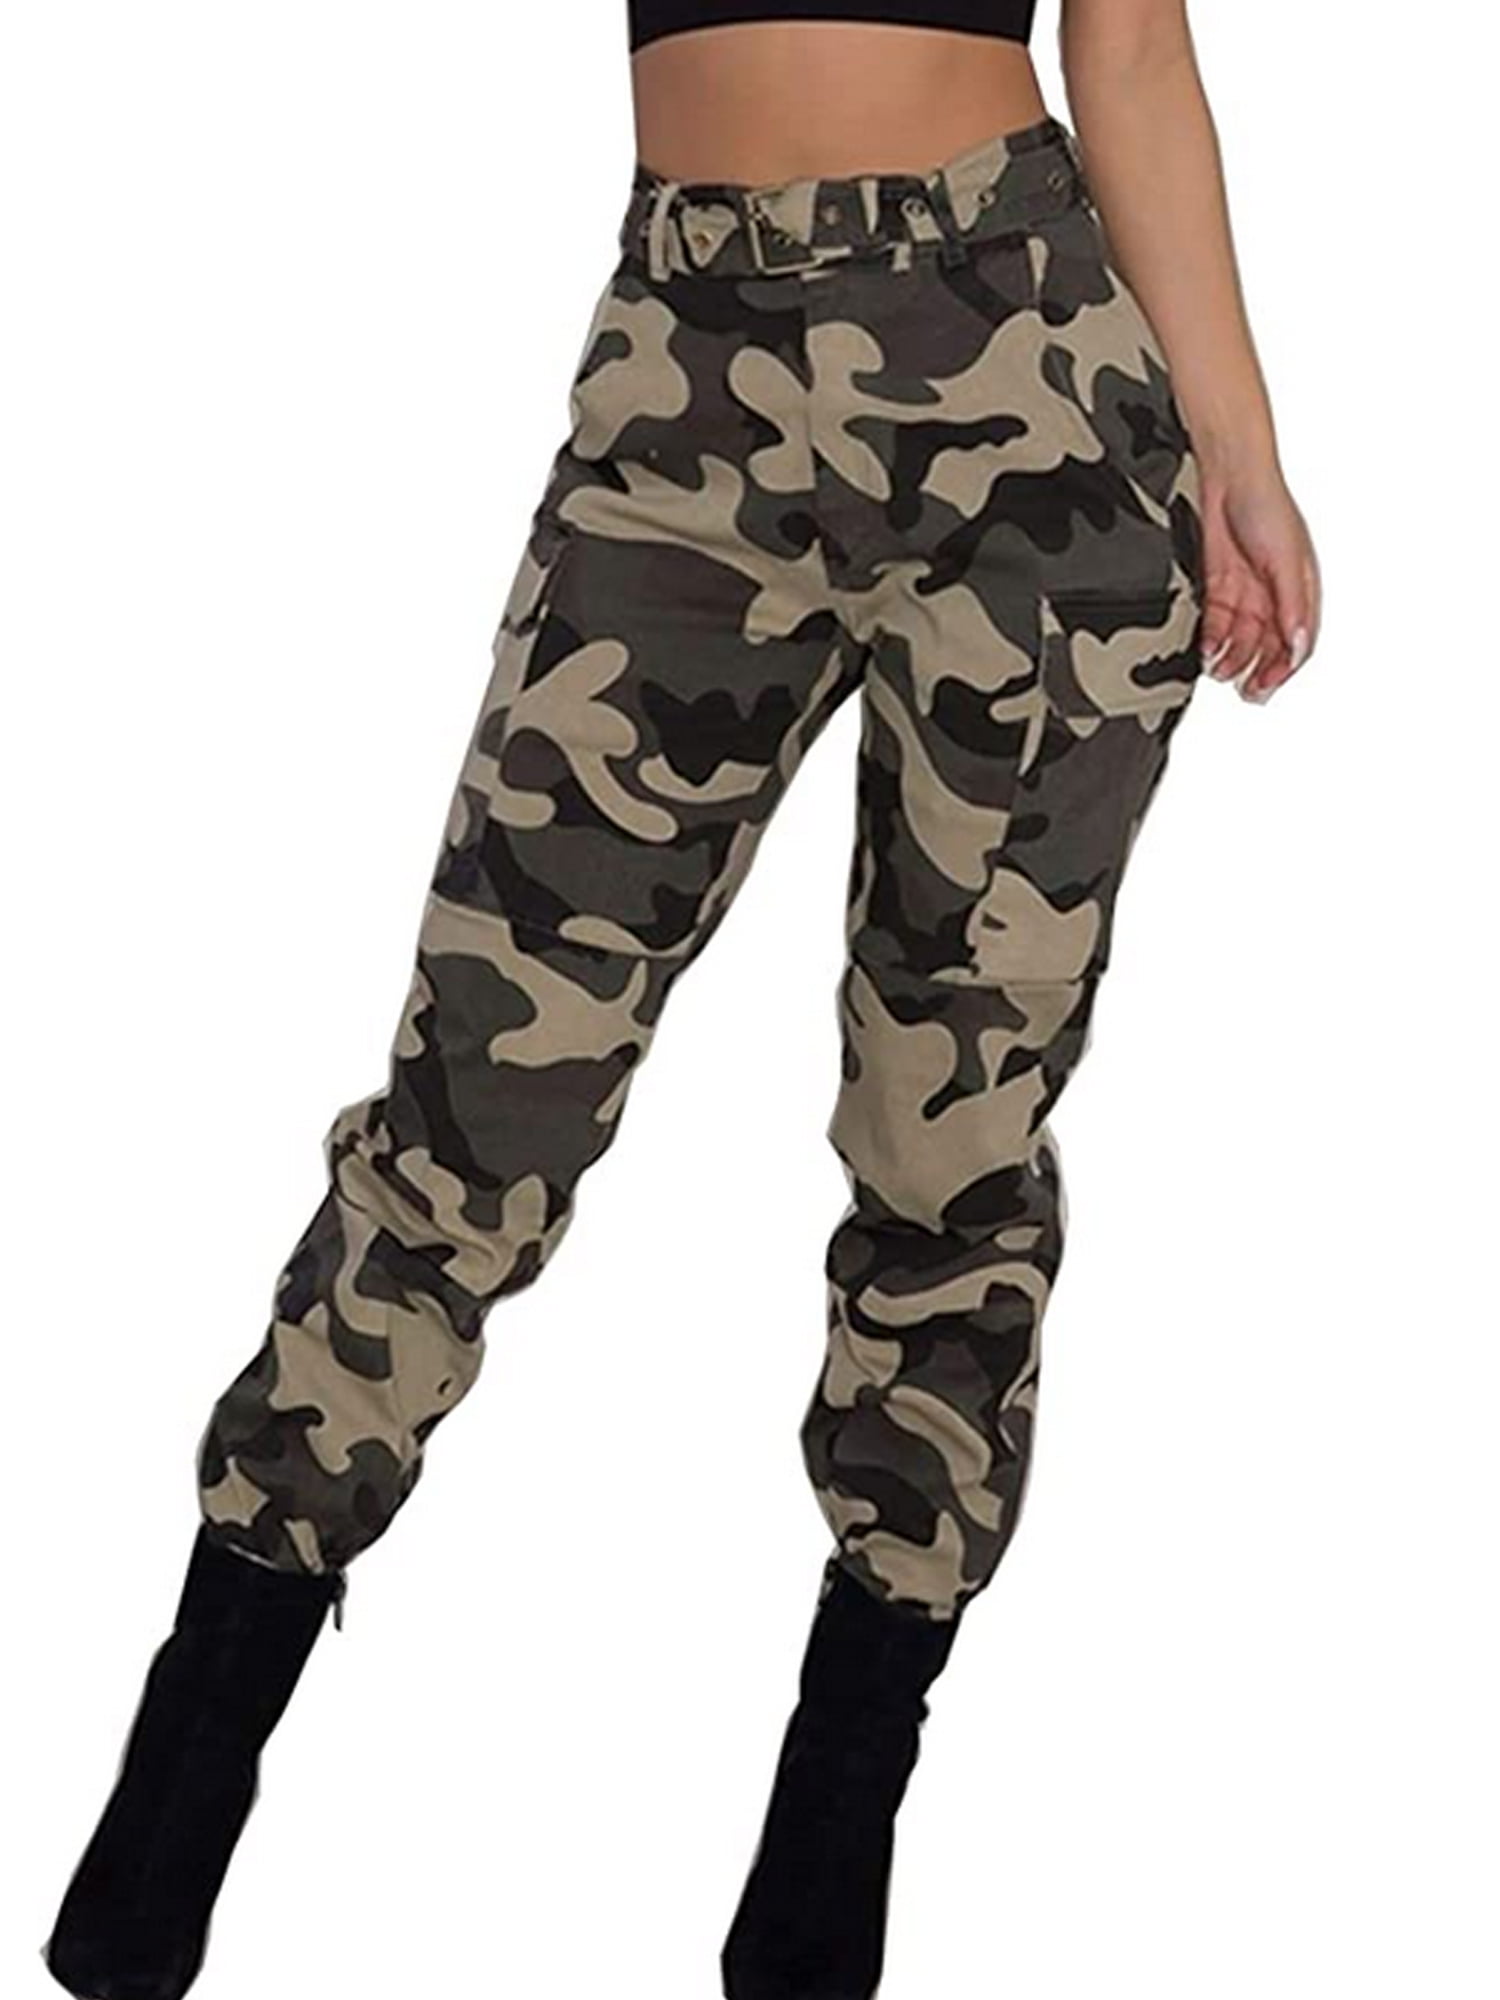 Women's Army Cargo Pants - Army Military